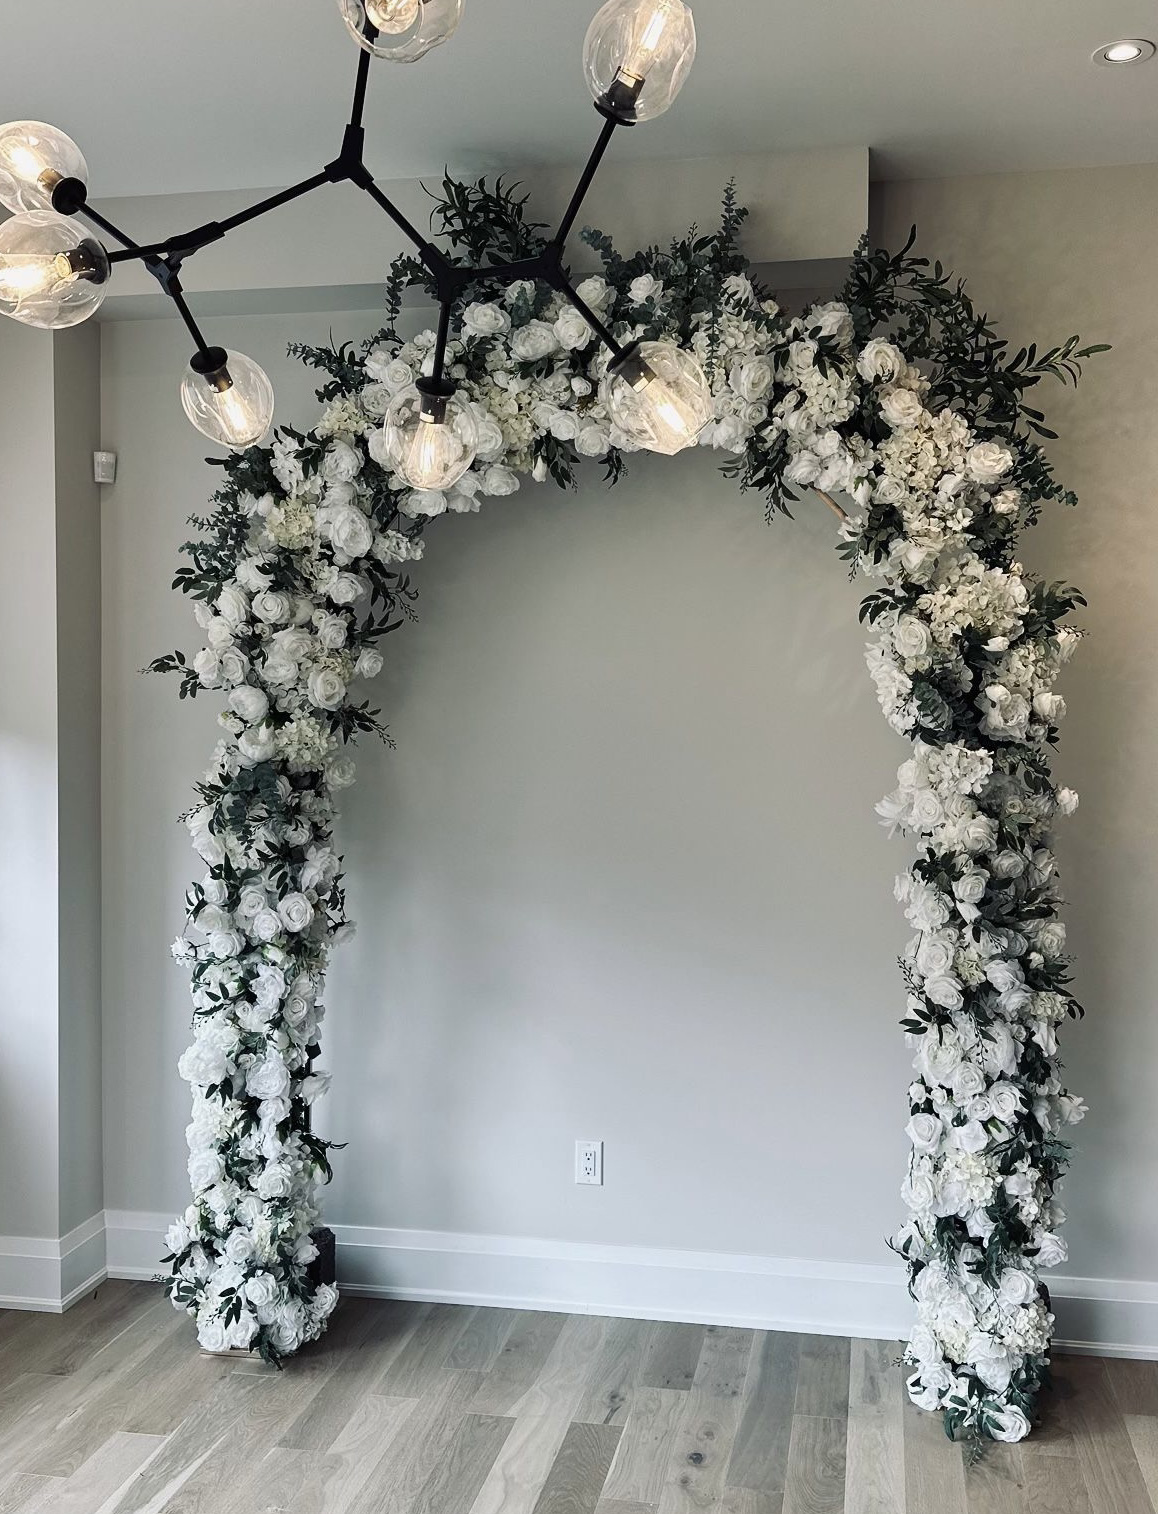 kitchener flower arches company